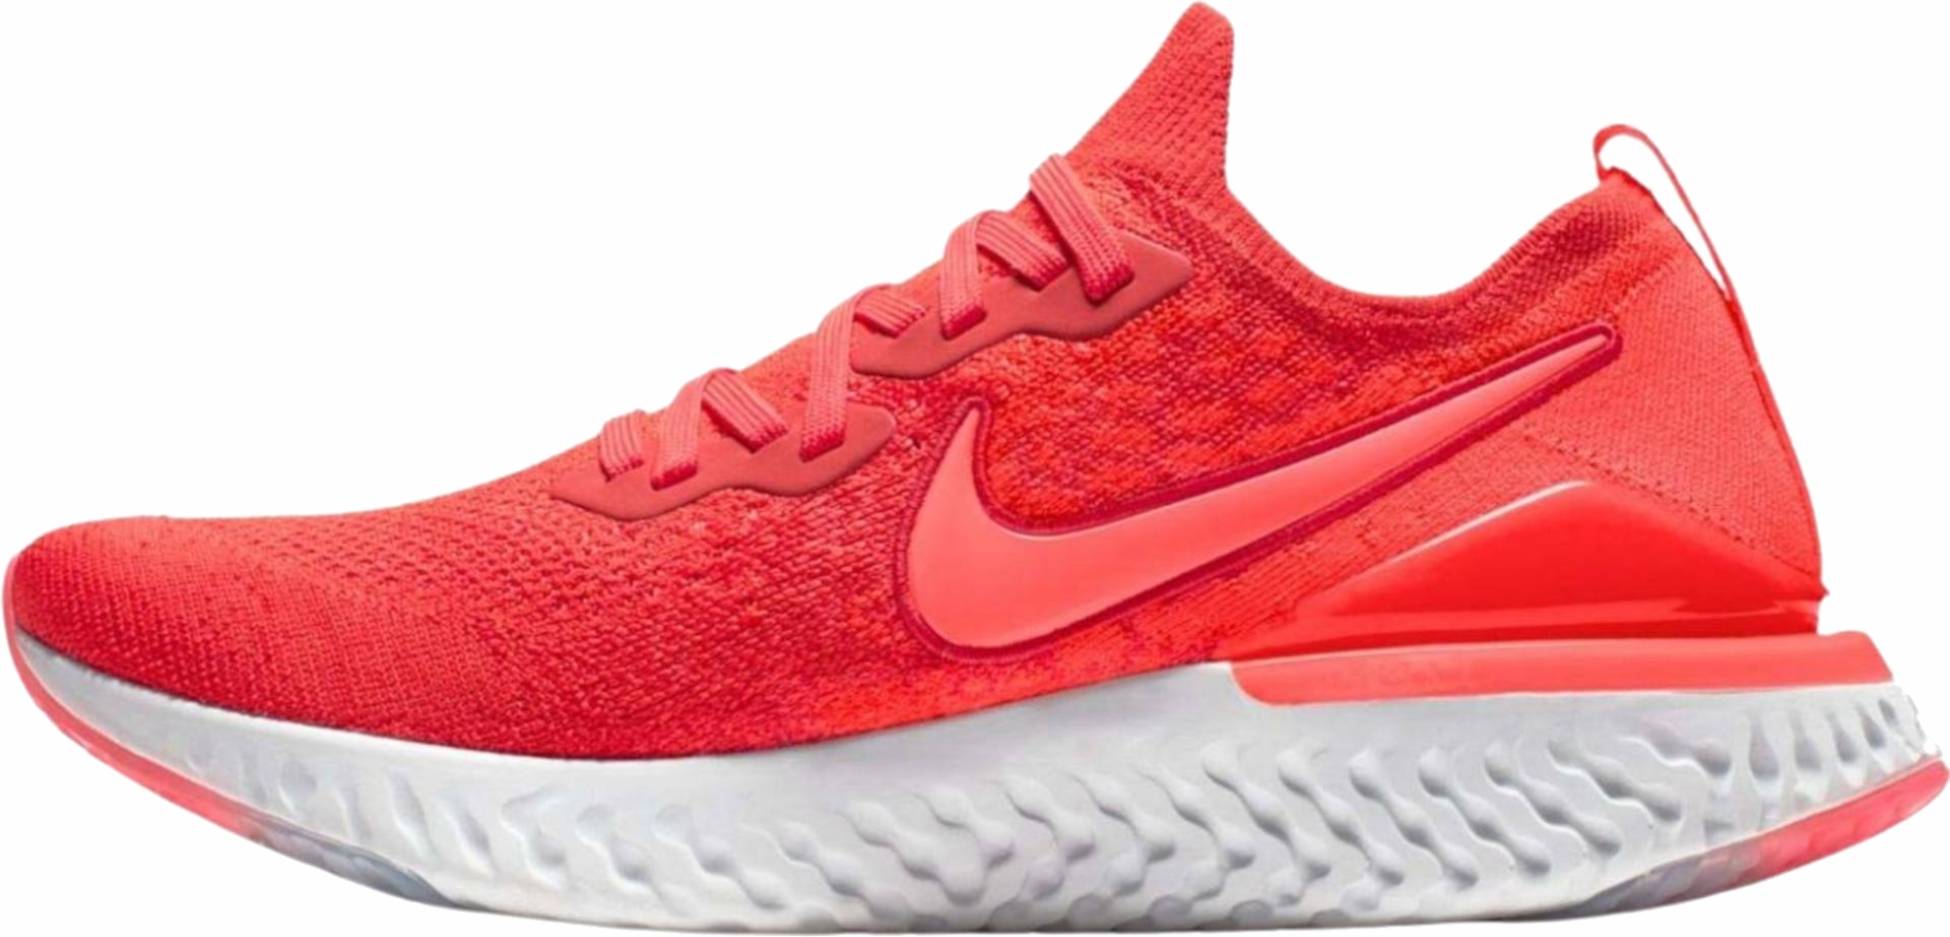 Save 29% on Red Running Shoes (229 